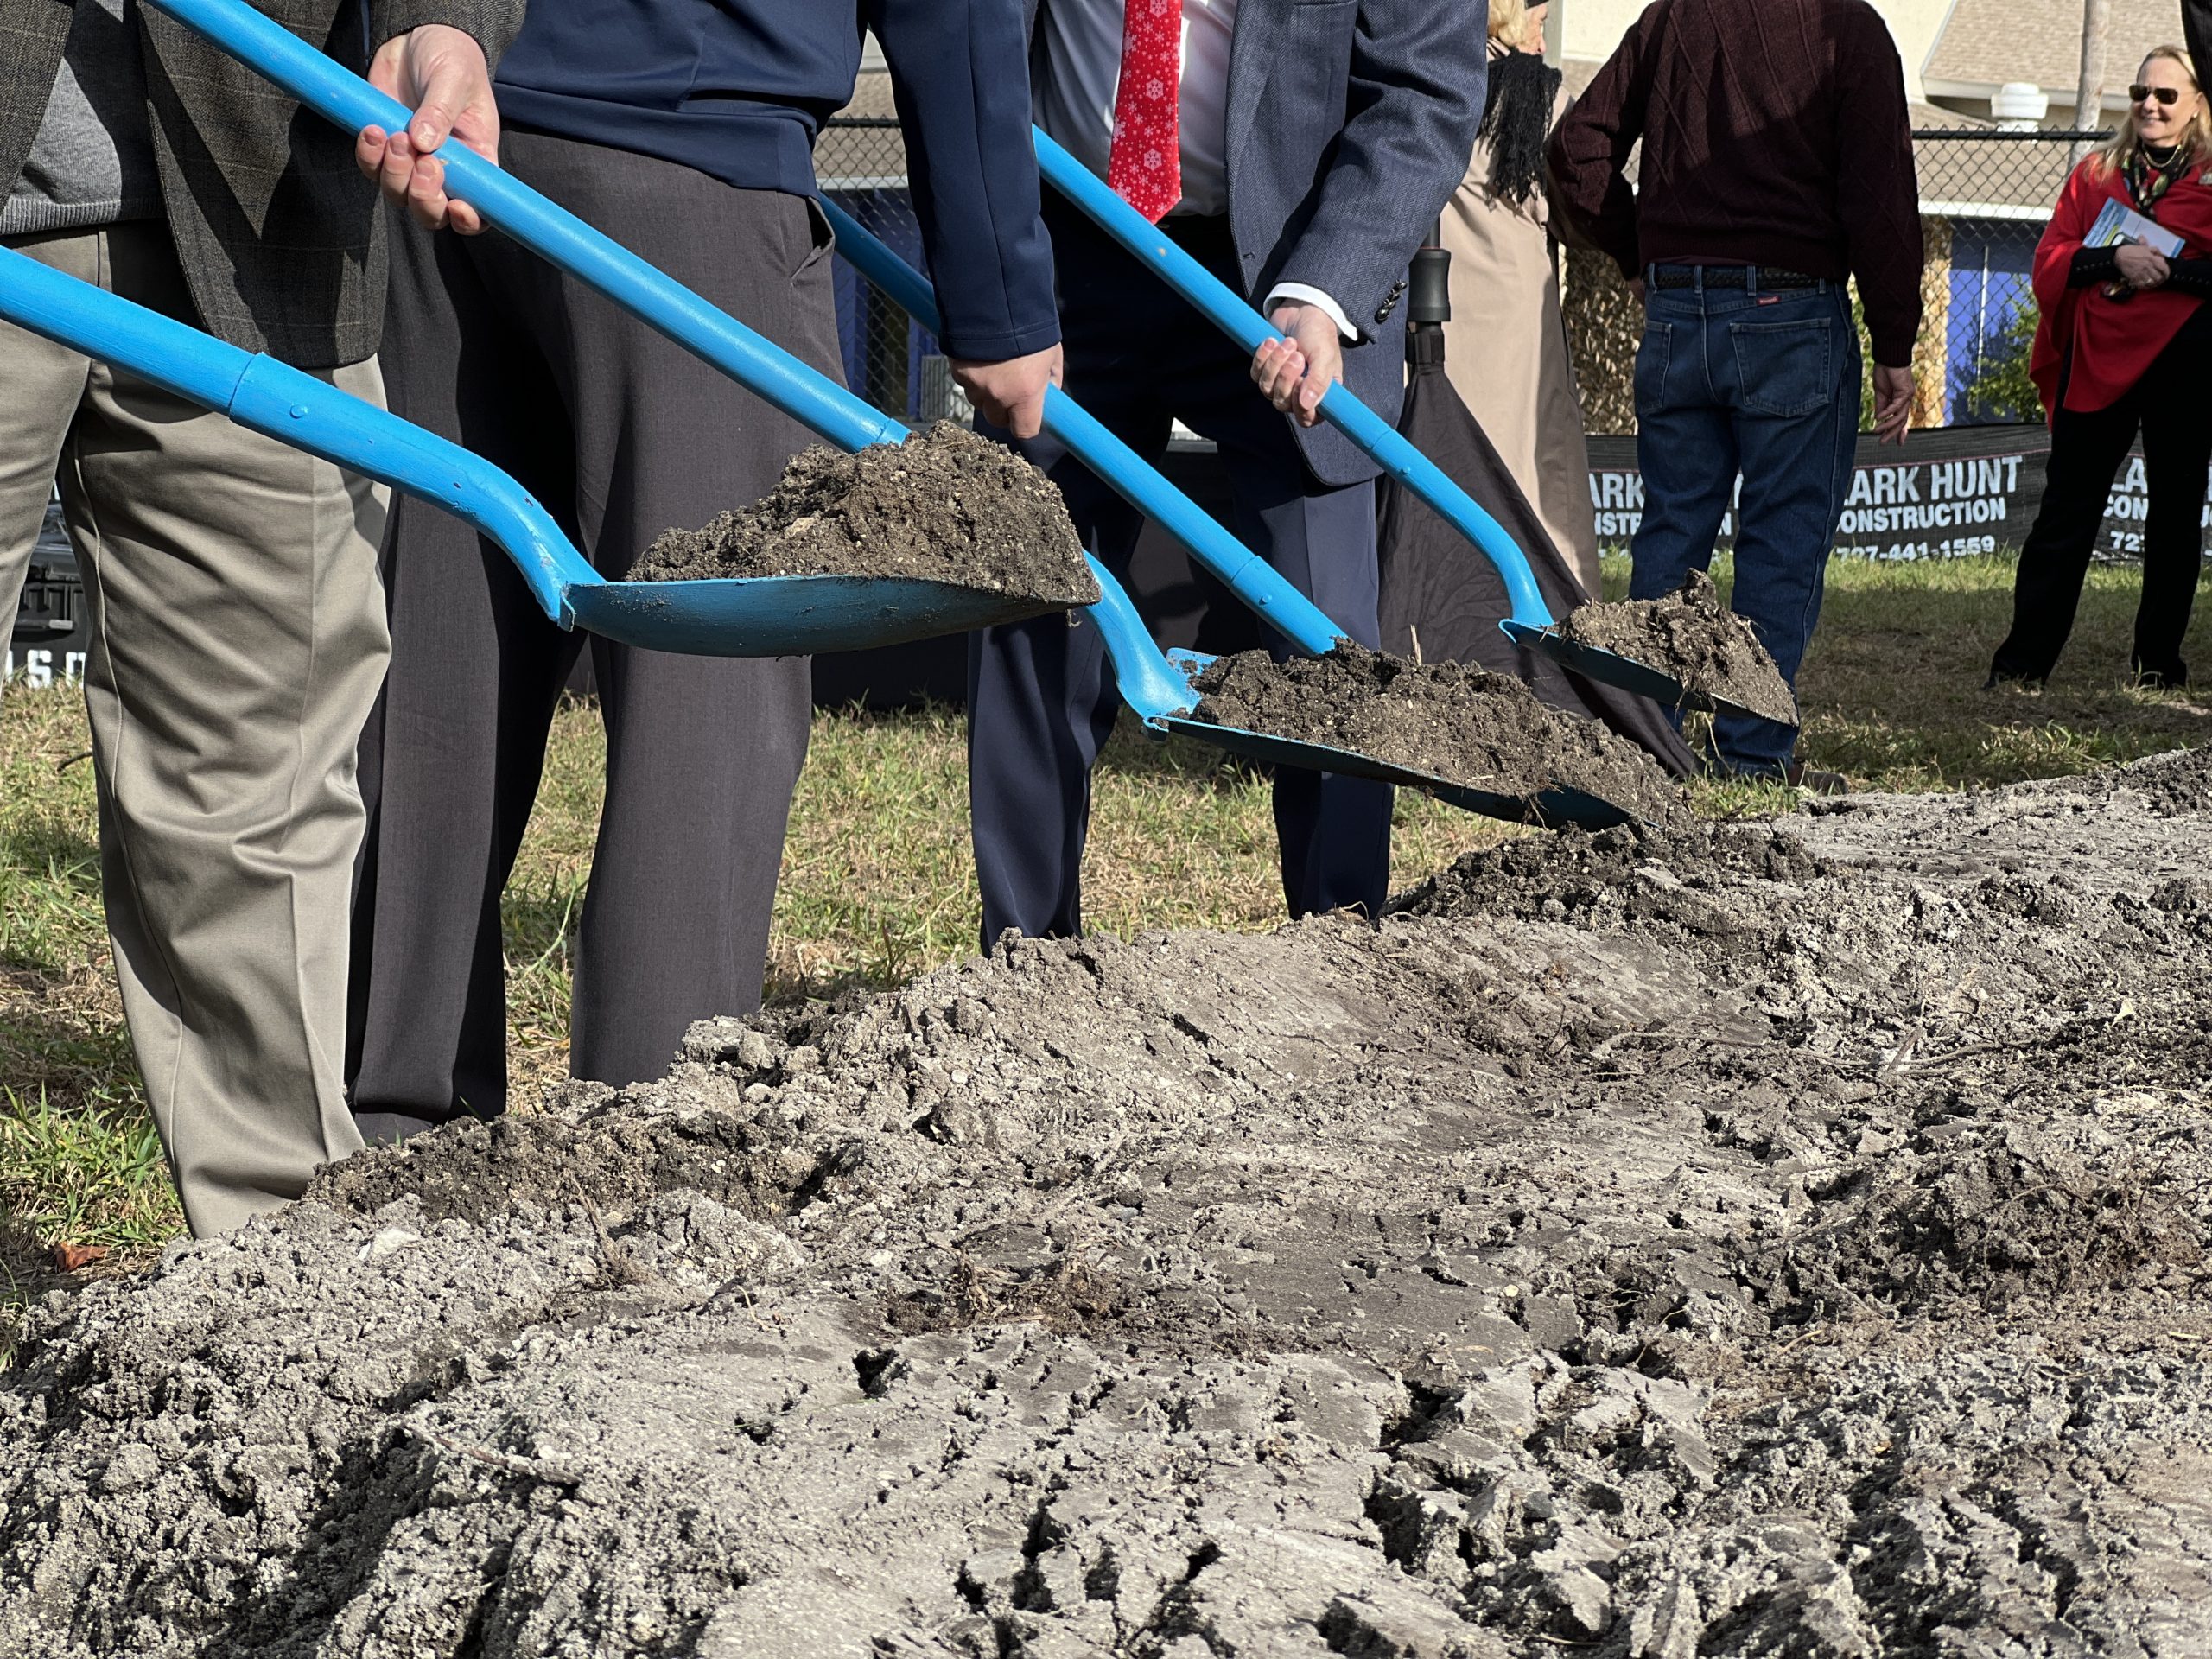 Habitat for Humanity breaks ground on 54 affordable townhomes amid housing crisis